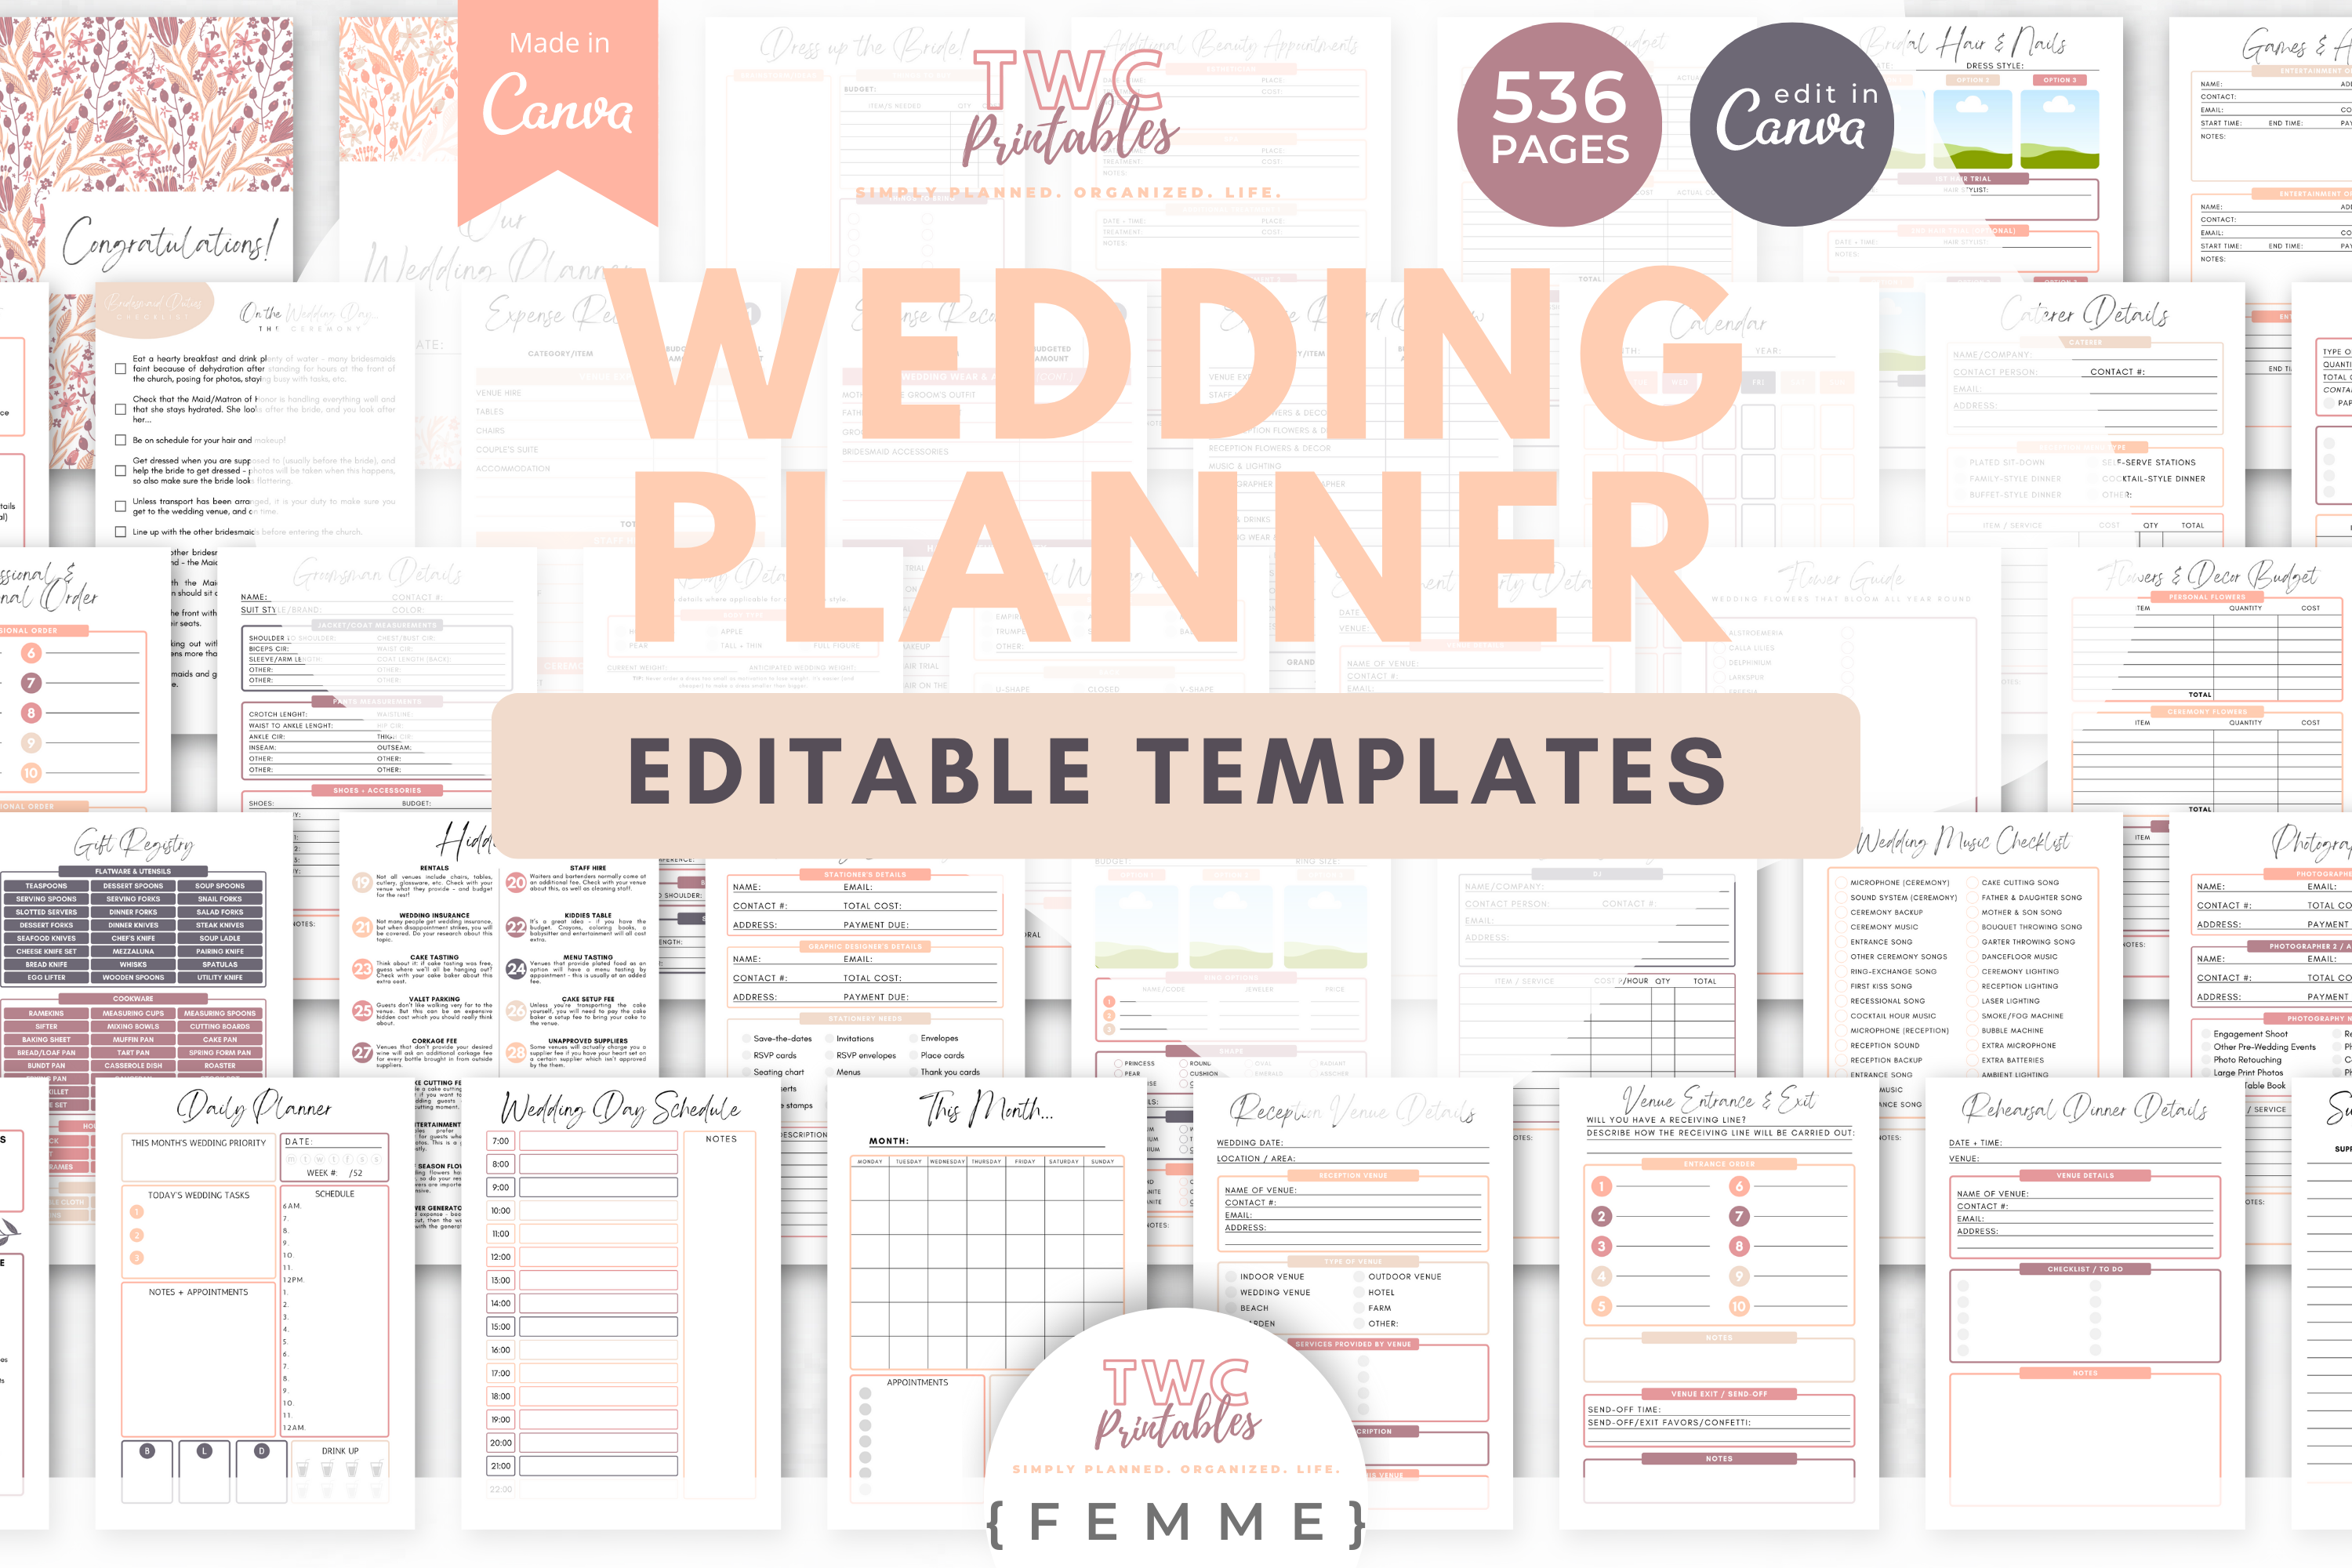 Downloadable Wedding Planner, 100 Pages Canva Editable Interior